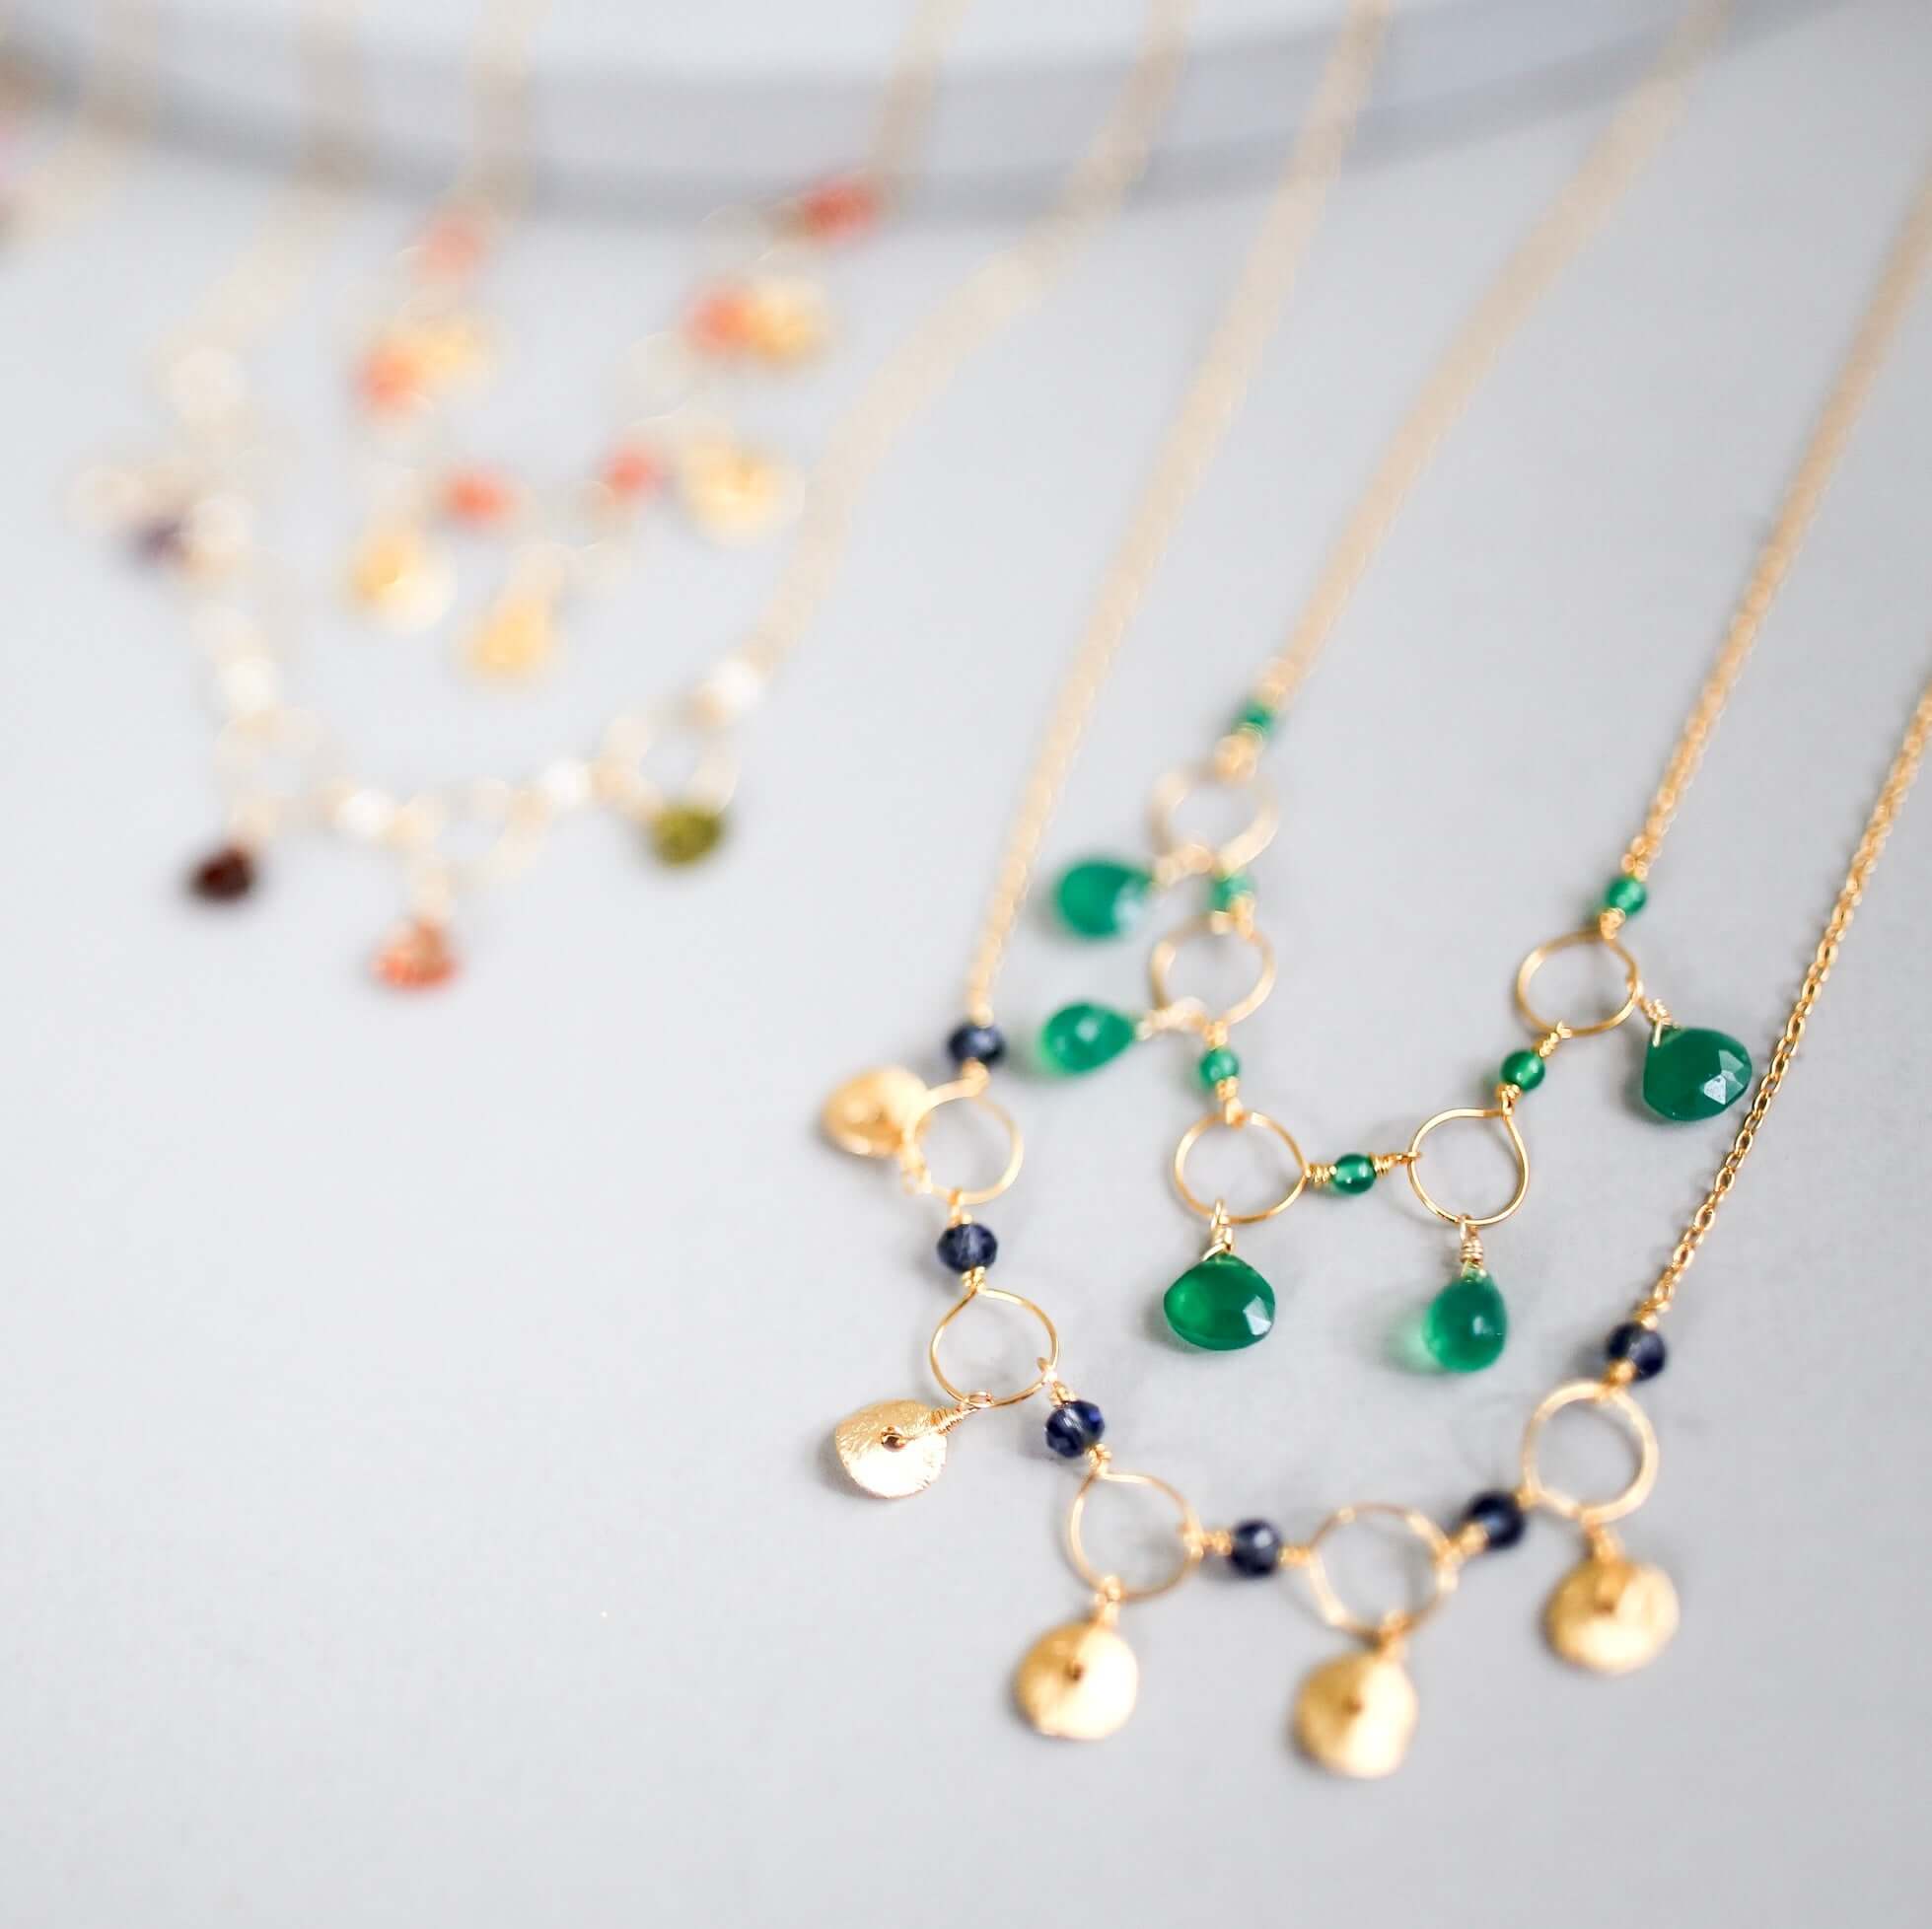 Colorful Gemstone Necklaces for Women